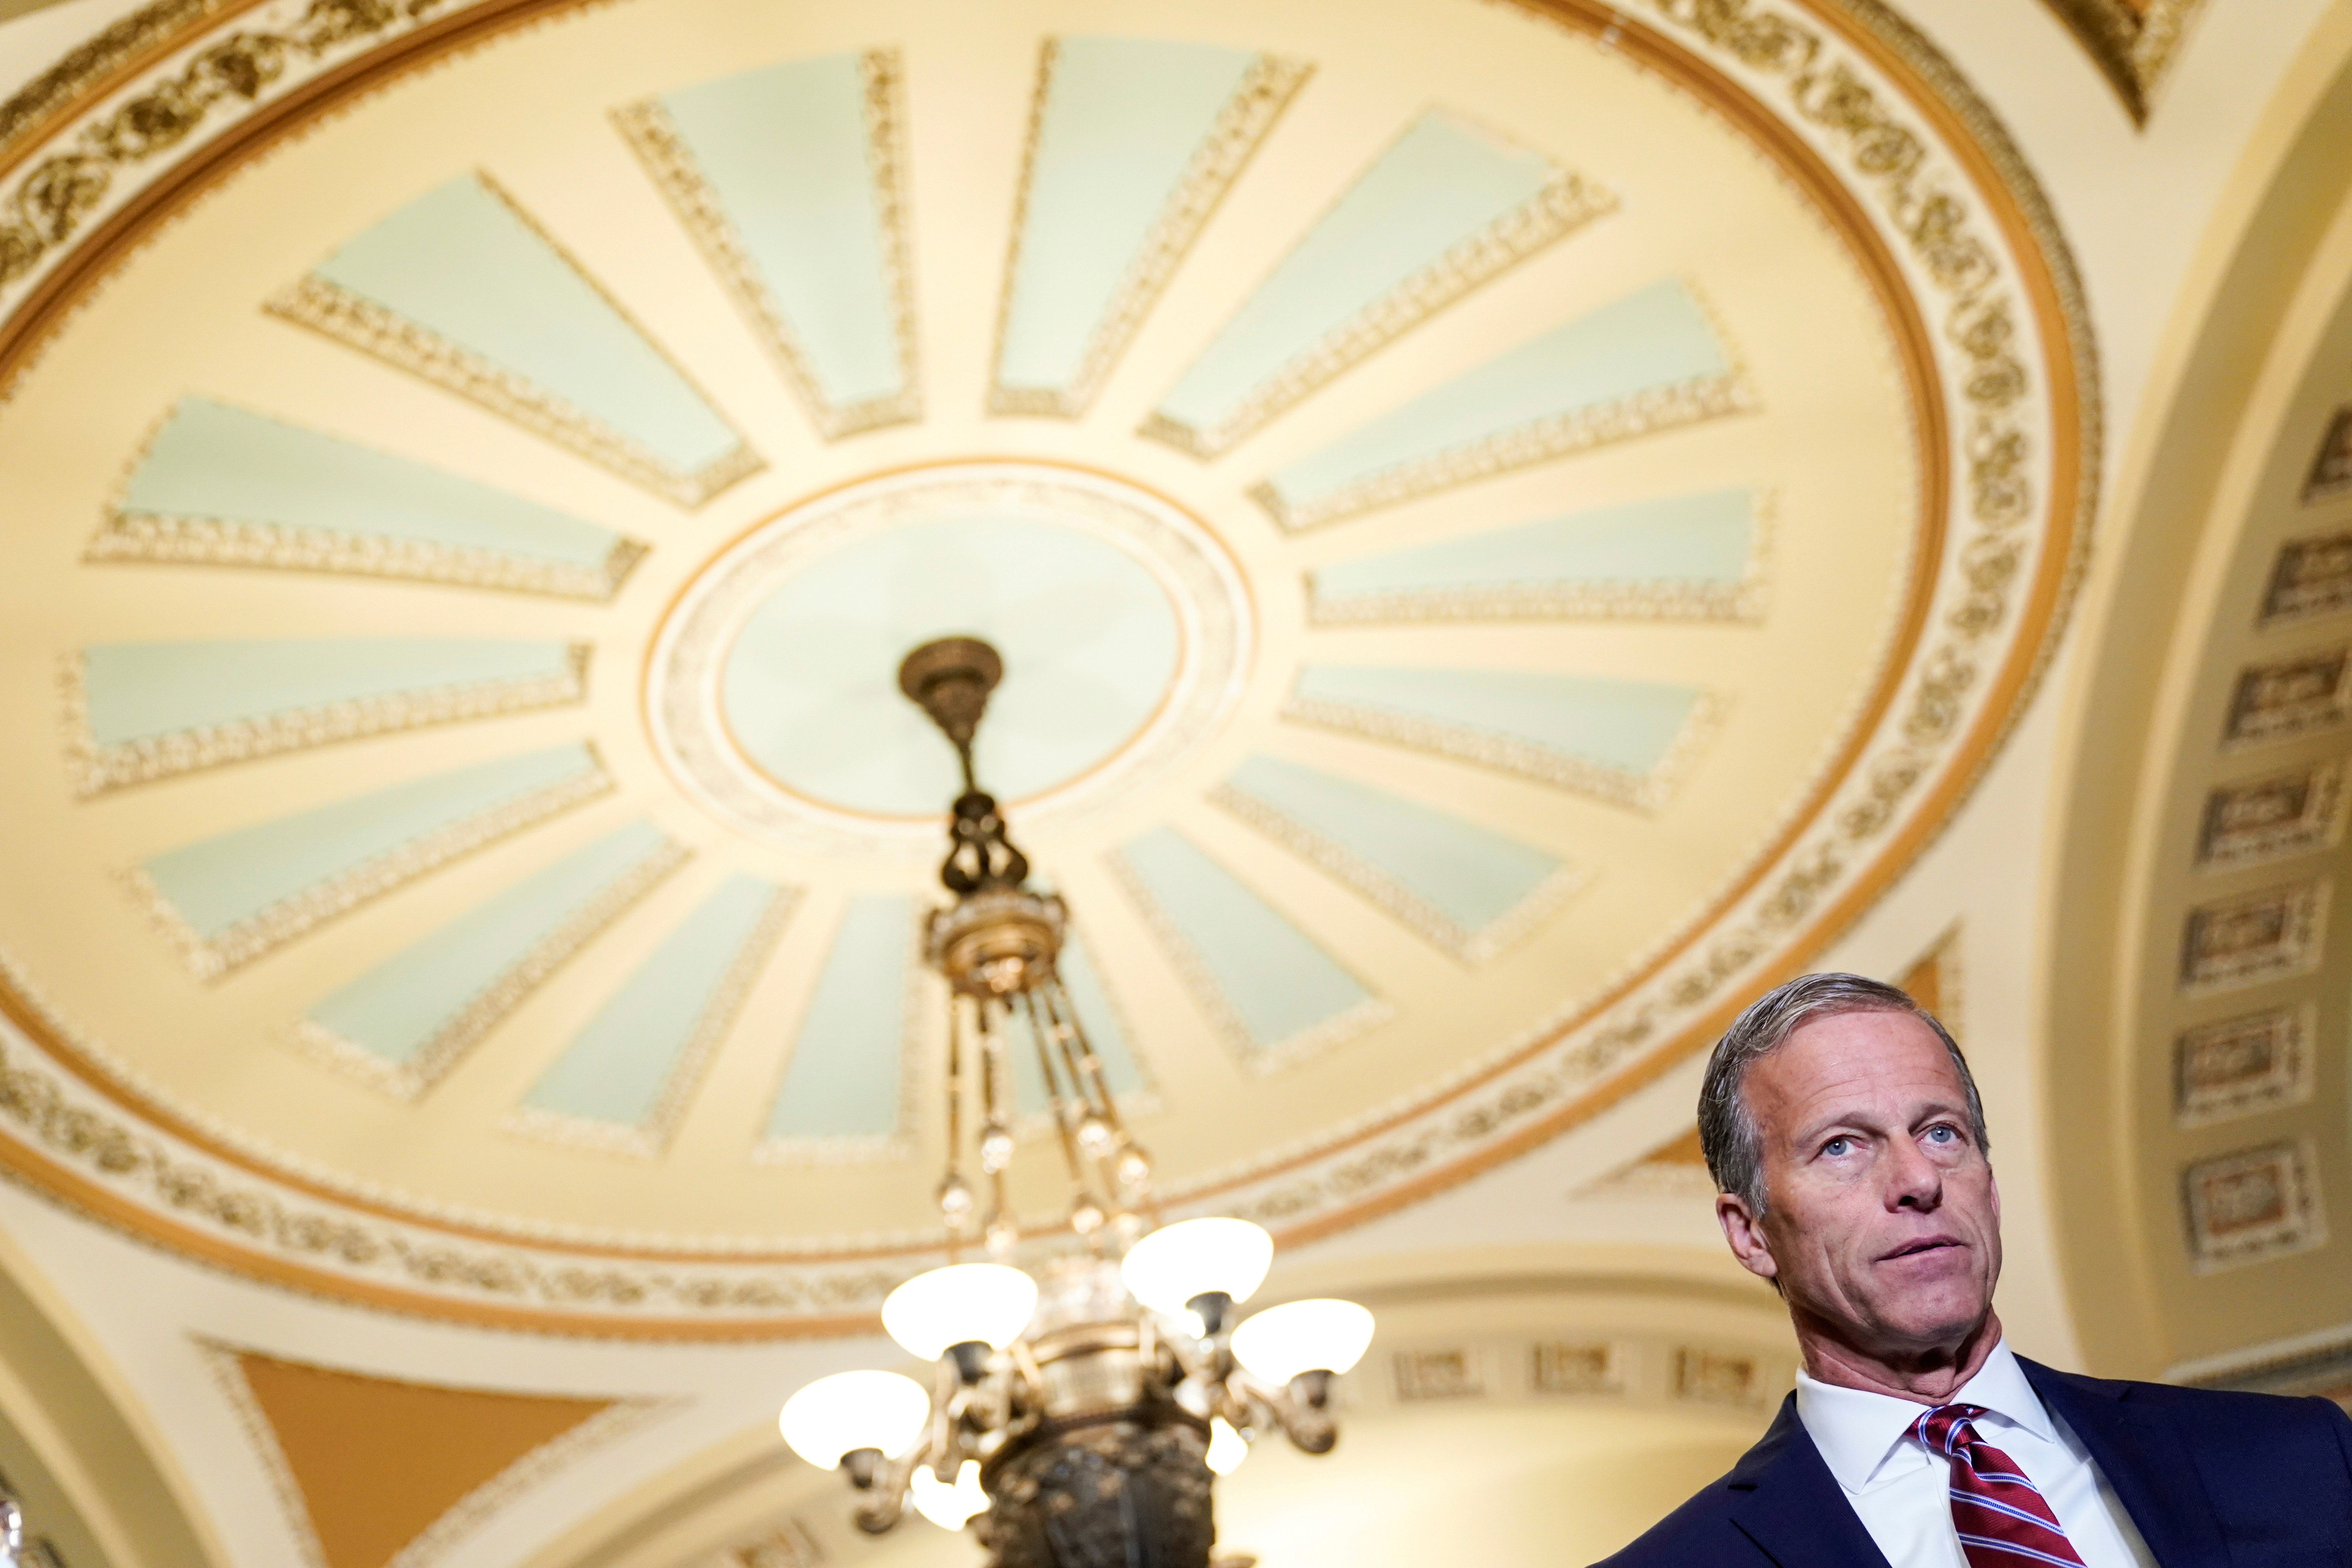 Senator John Thune (R-SD) speaks after the Republican policy luncheon on Capitol Hill in Washington, U.S., July 27, 2021.      REUTERS/Joshua Roberts